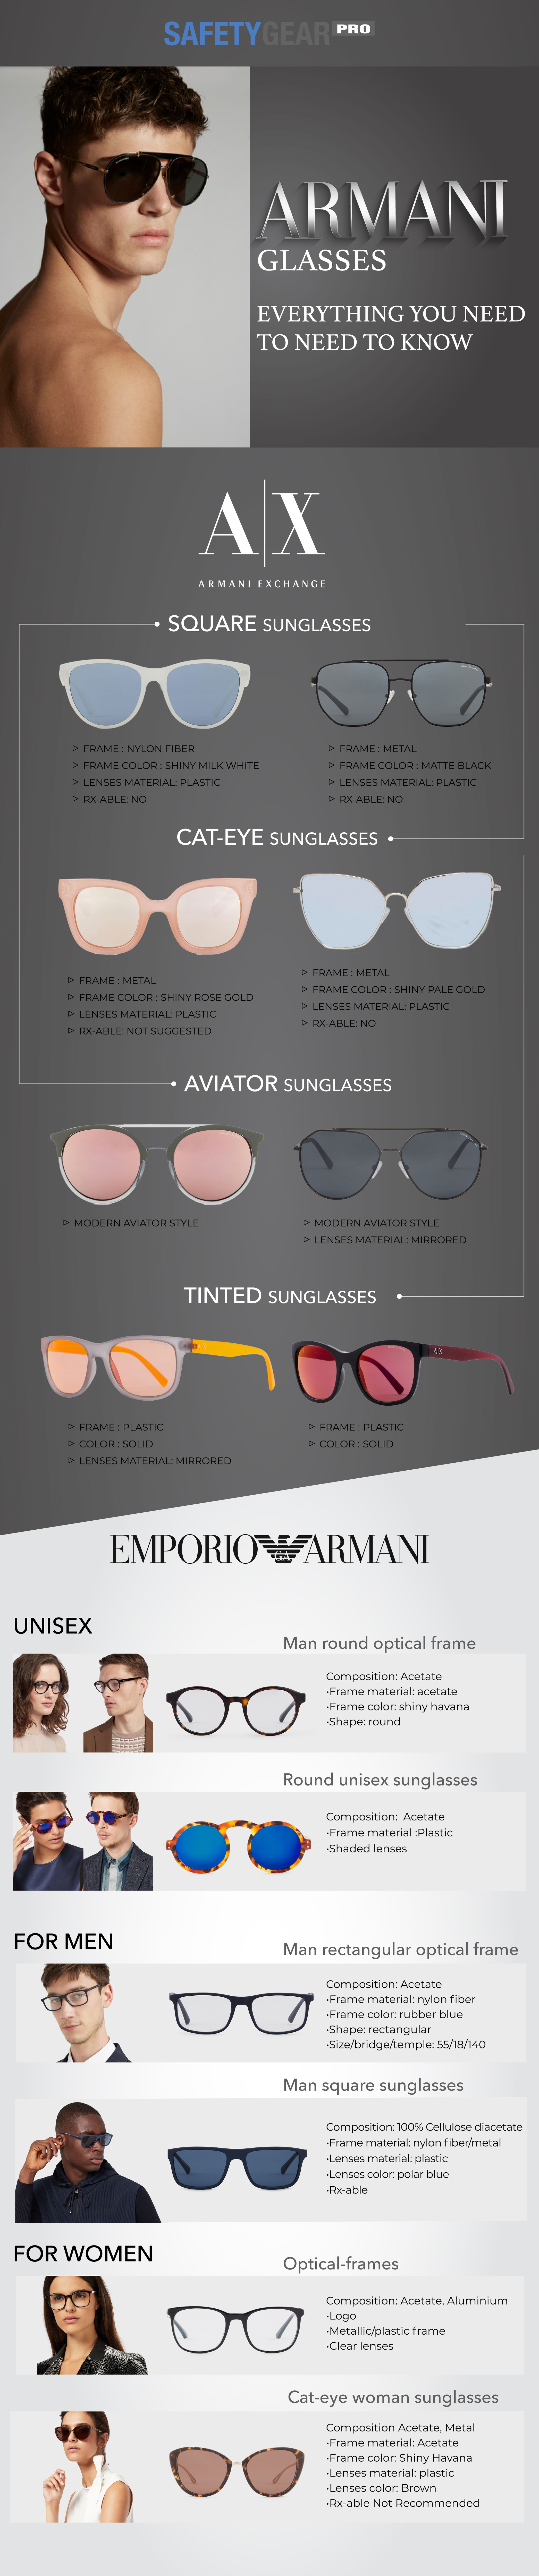 What You Need To Know About Armani Glasses | Safety Gear Pro